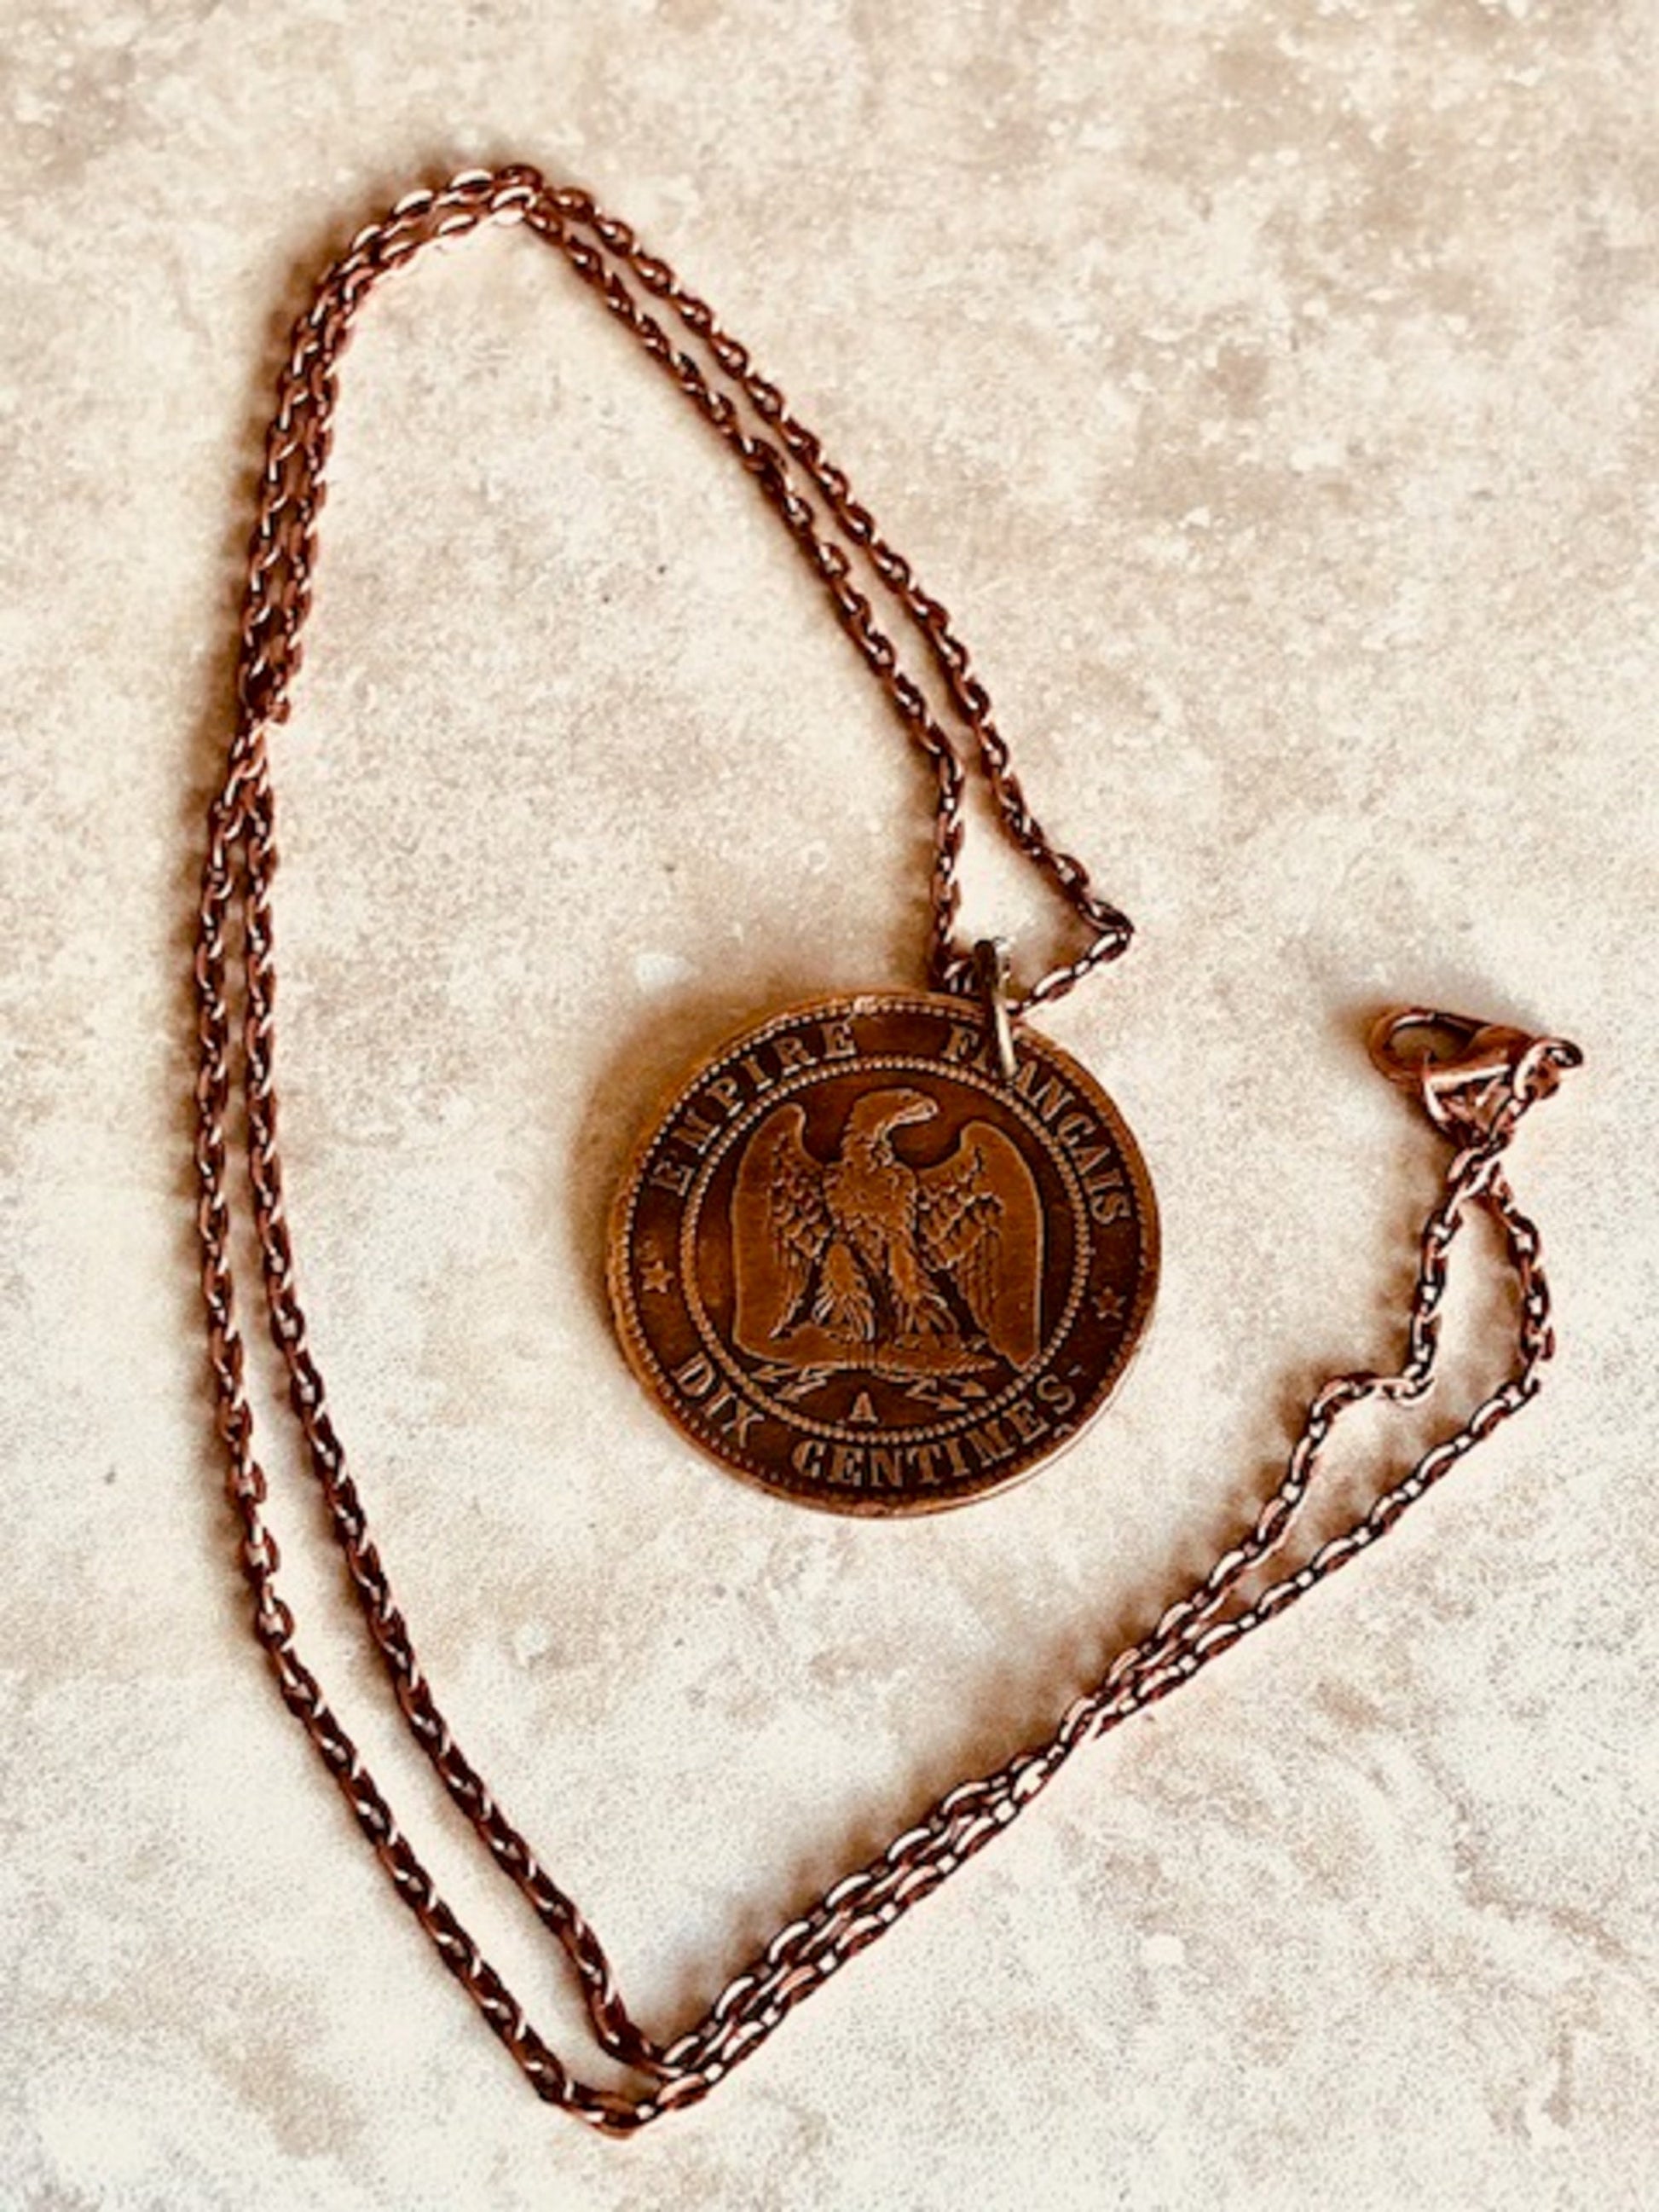 France Coin Necklace French Pendant 10 Dix Centimes Liberty Equality Fraternity Jewelry Gift Friend Charm For Him Her World Coin Collector